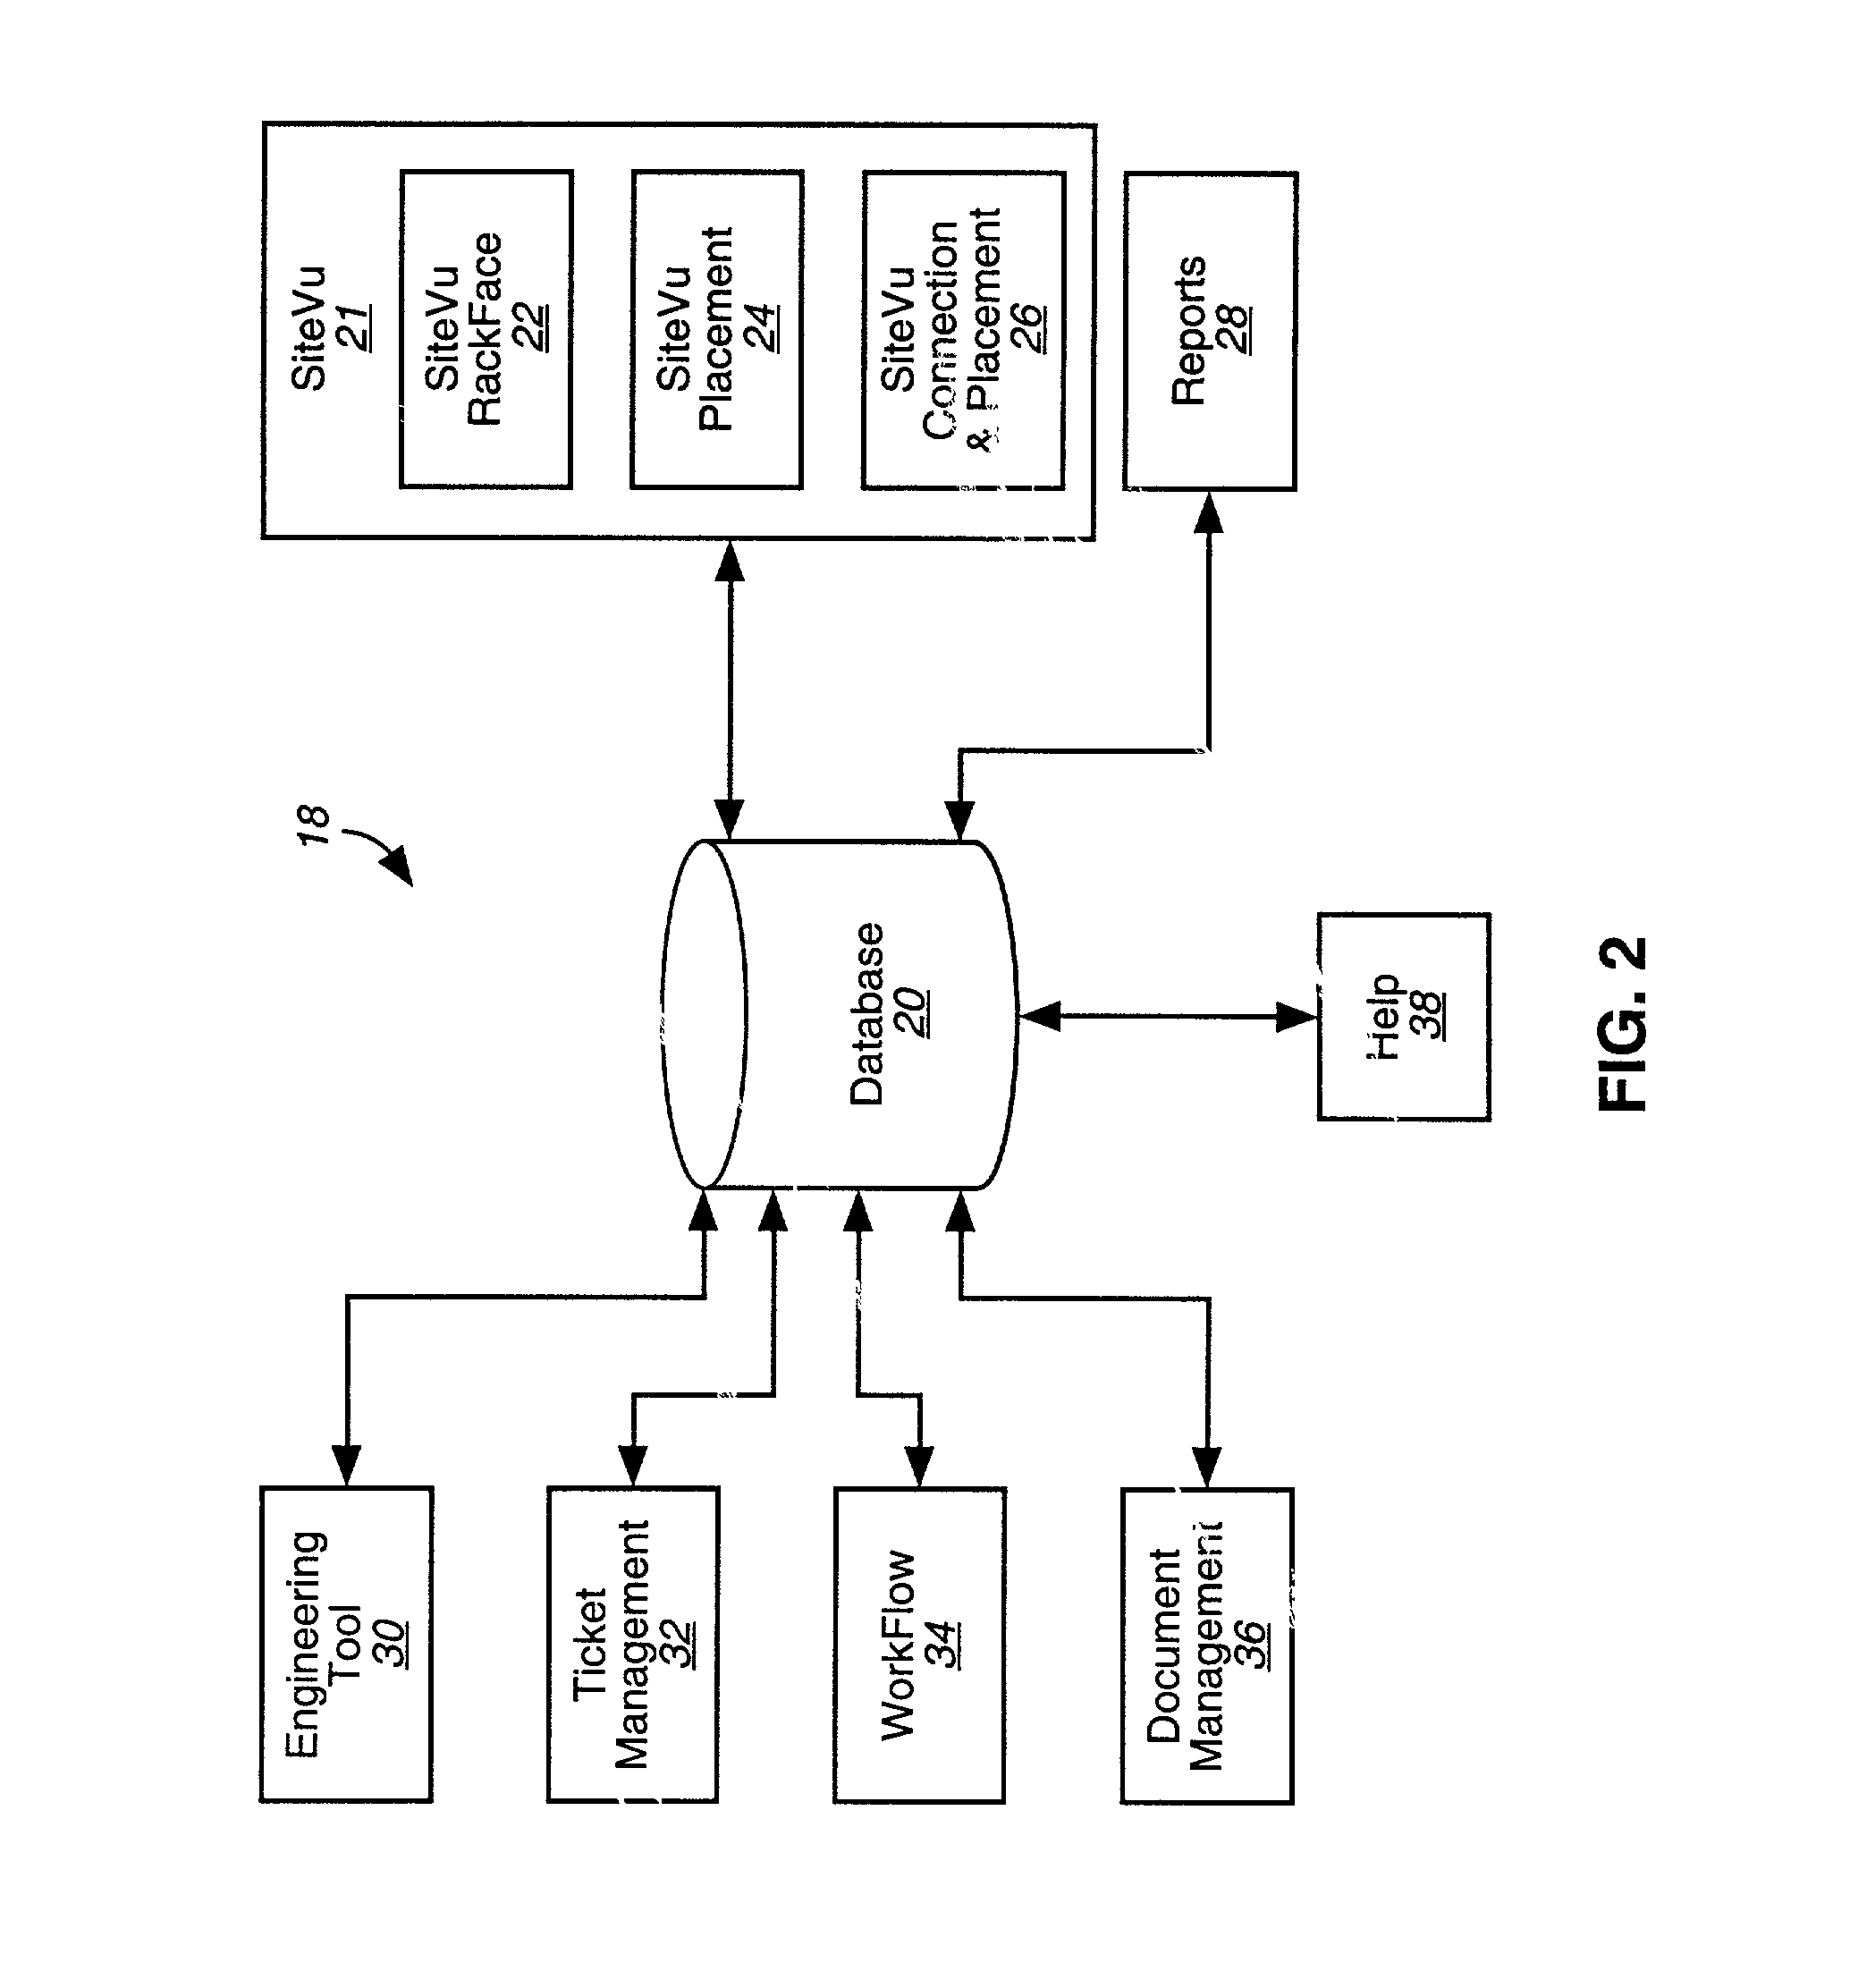 Method, system and program product for generating scenarios utilizing graphical objects representing hierarchically arranged elements of a modeled environment